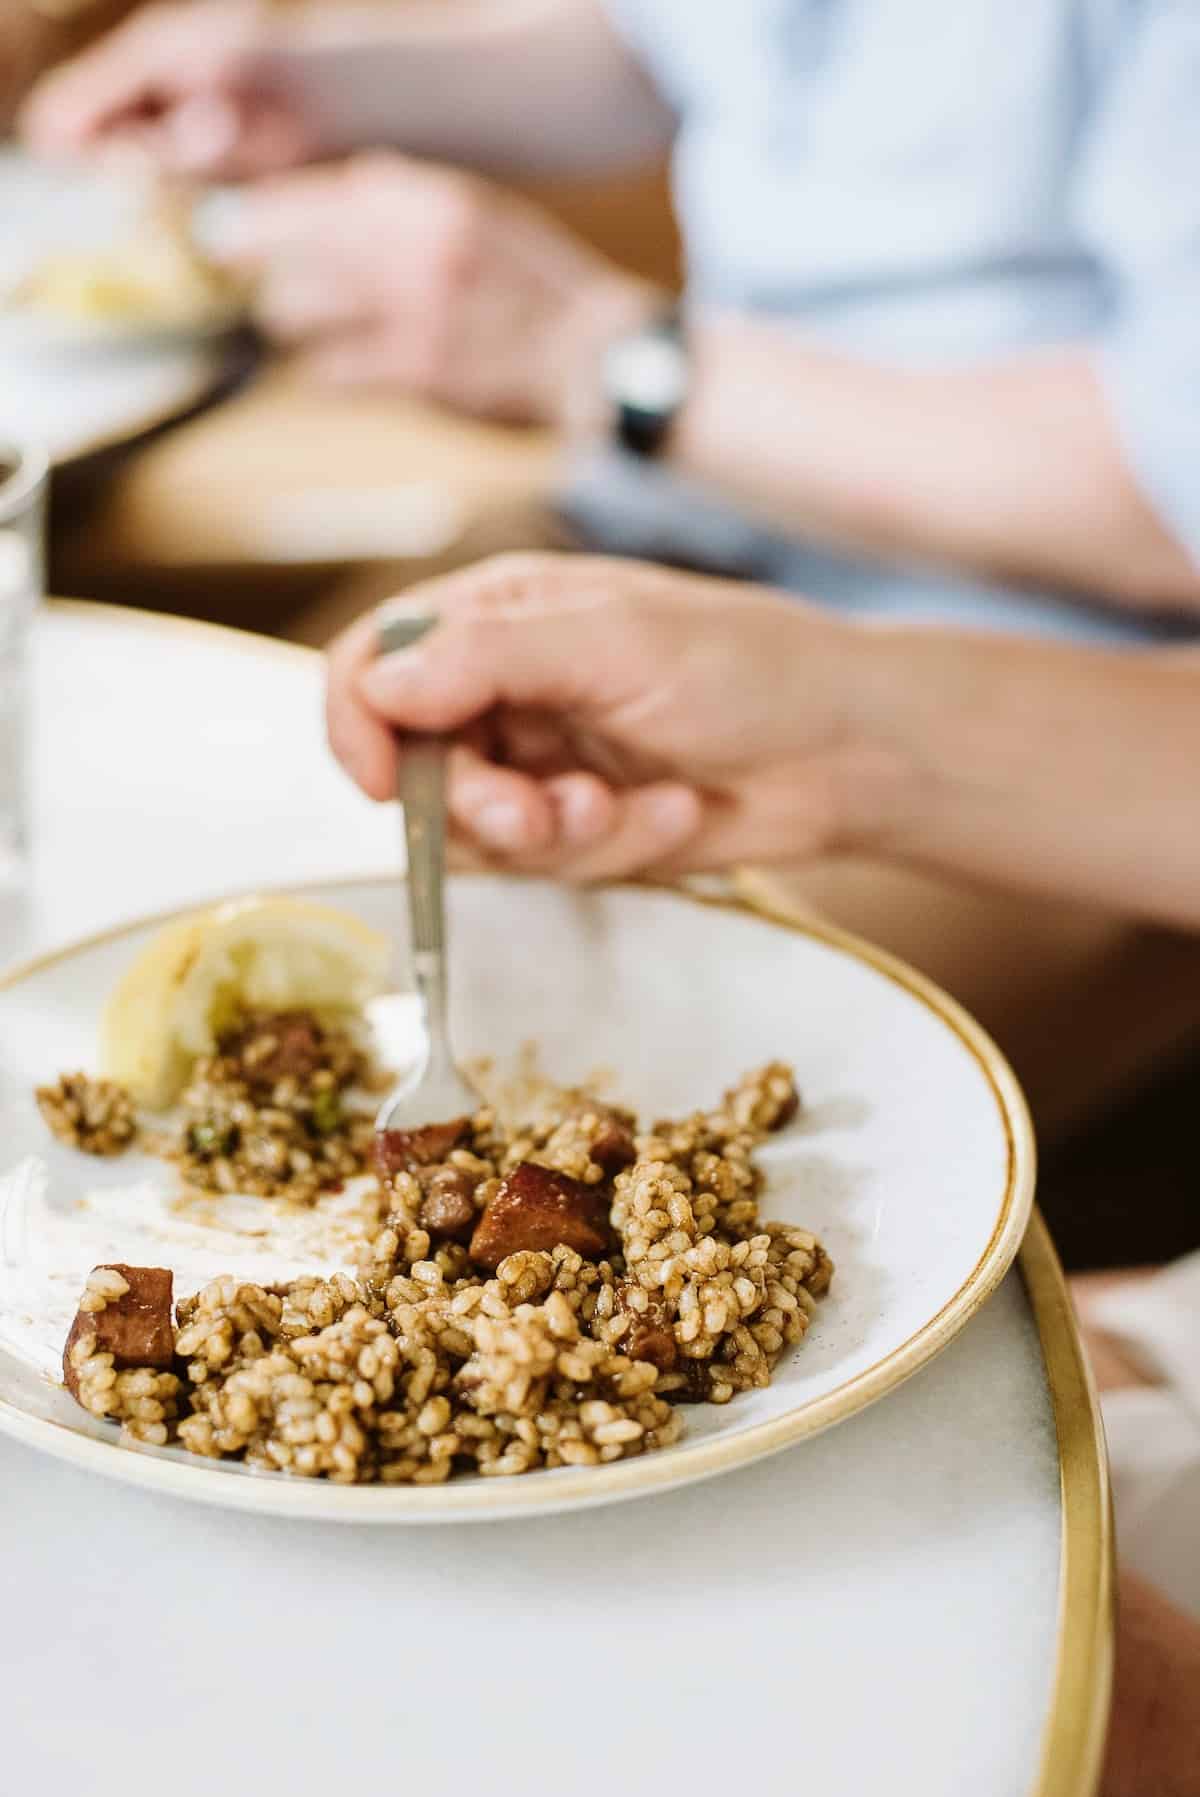 Person's hand eating a brown-colored seafood rice dish with a fork off a white plate.